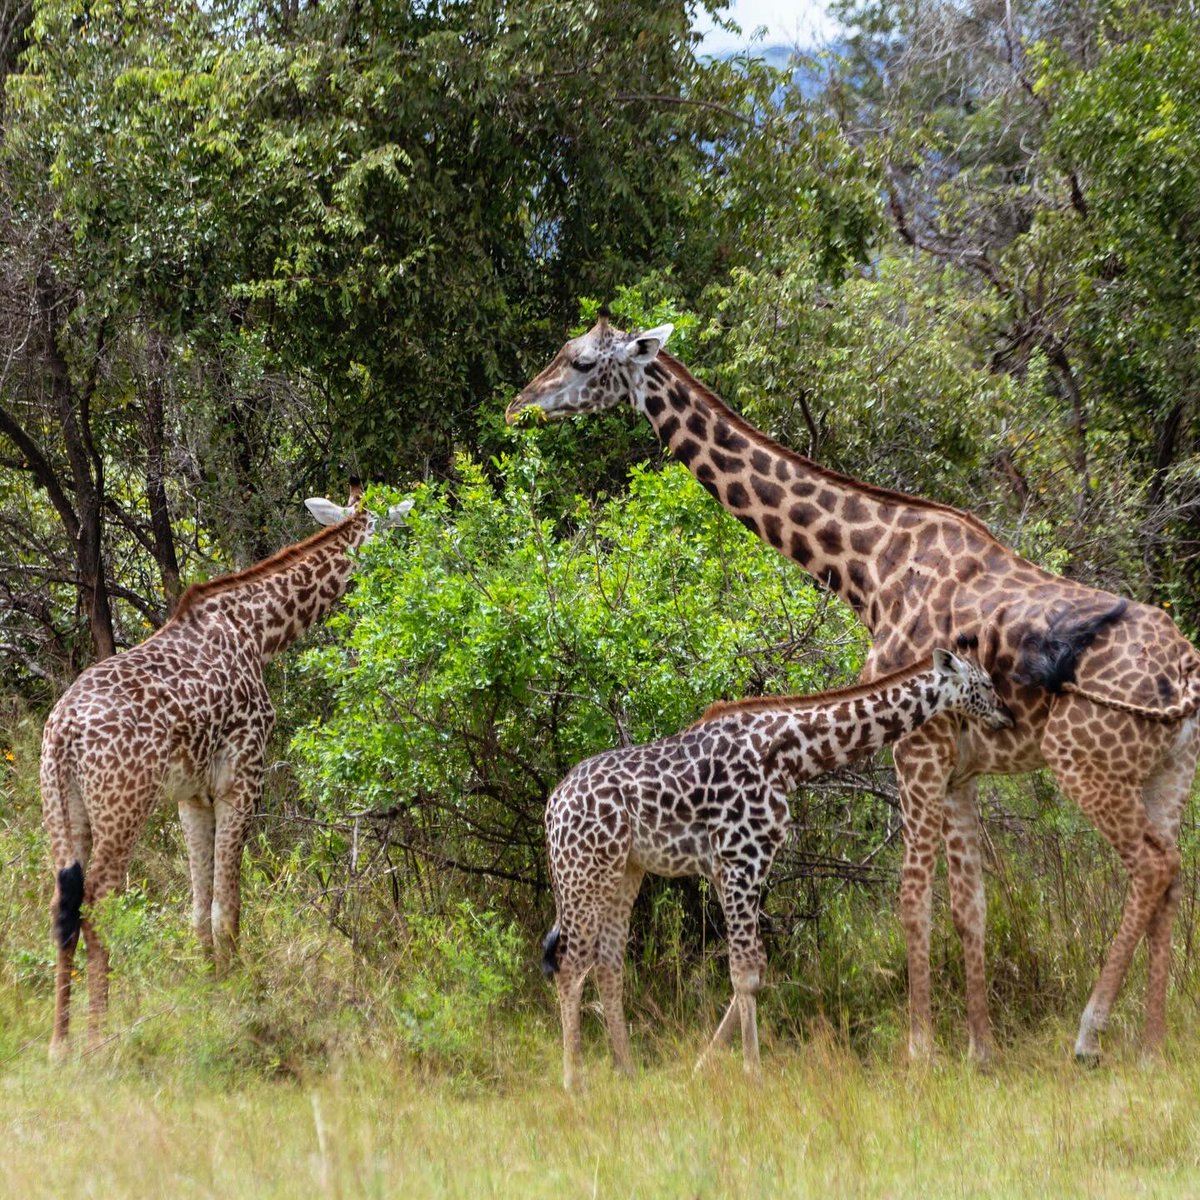 When scenery blends with wildlife. Elegant & Beautiful, the African Giraffes showing off at the @AkageraPark #DGuideExperiences #ExceptionalWildlife